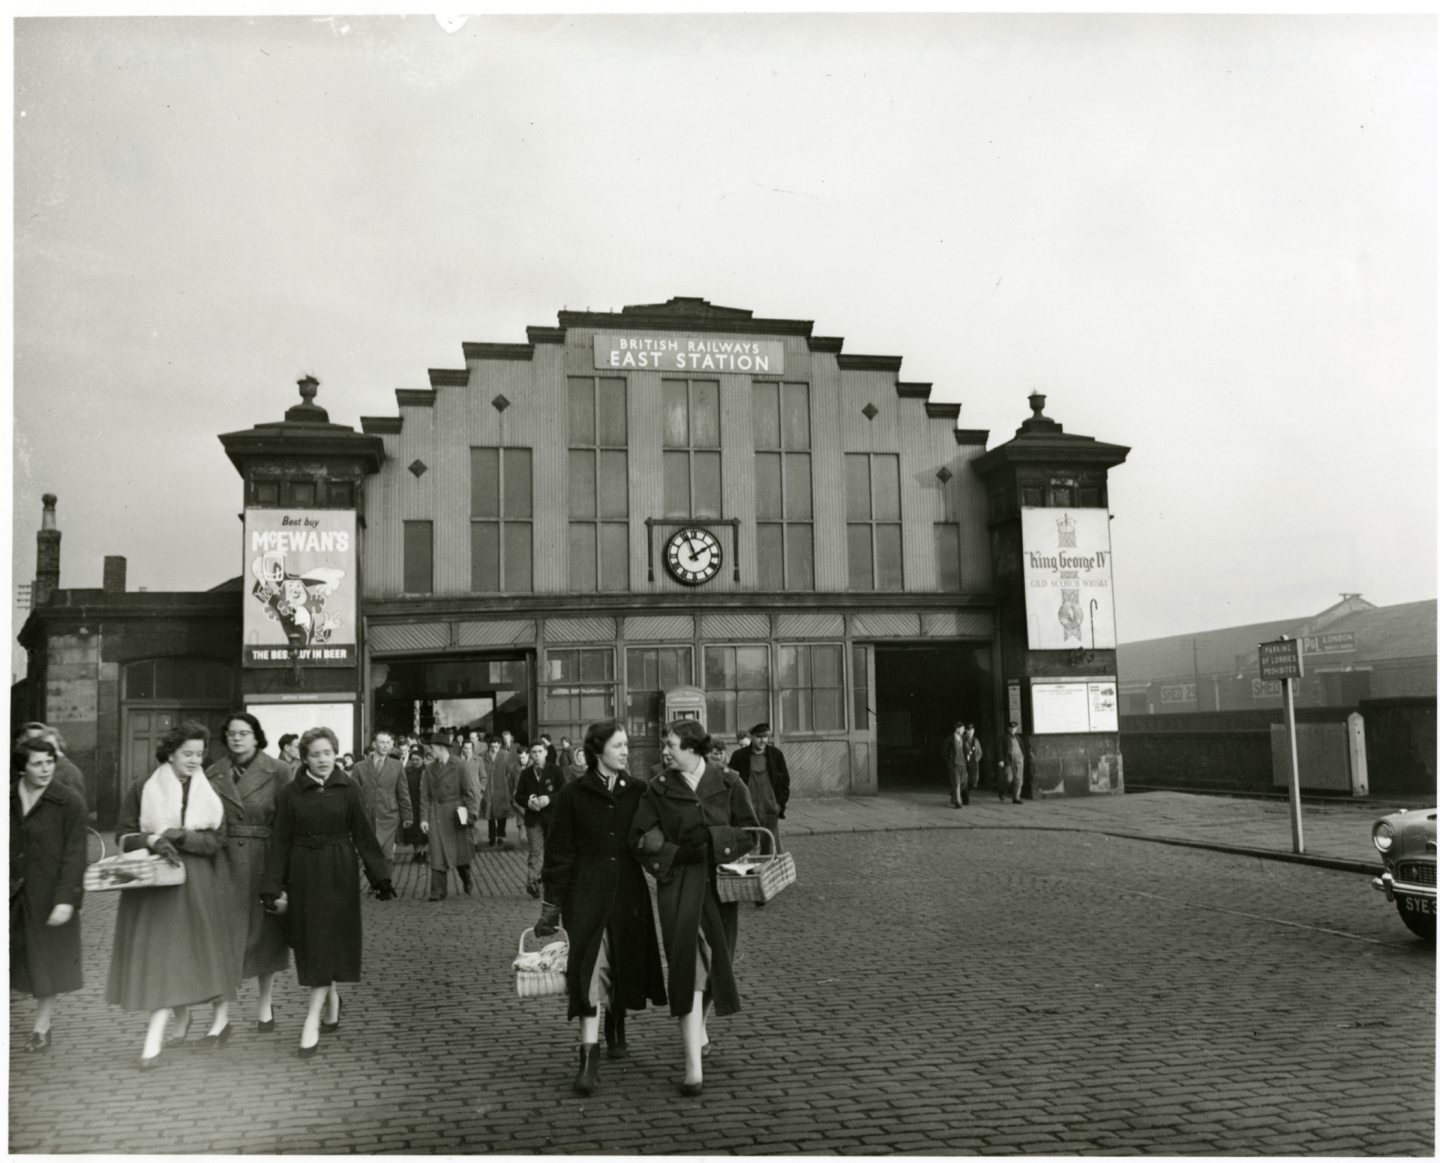 The old Dundee East Station as people are coming out onto the street in December 1958.